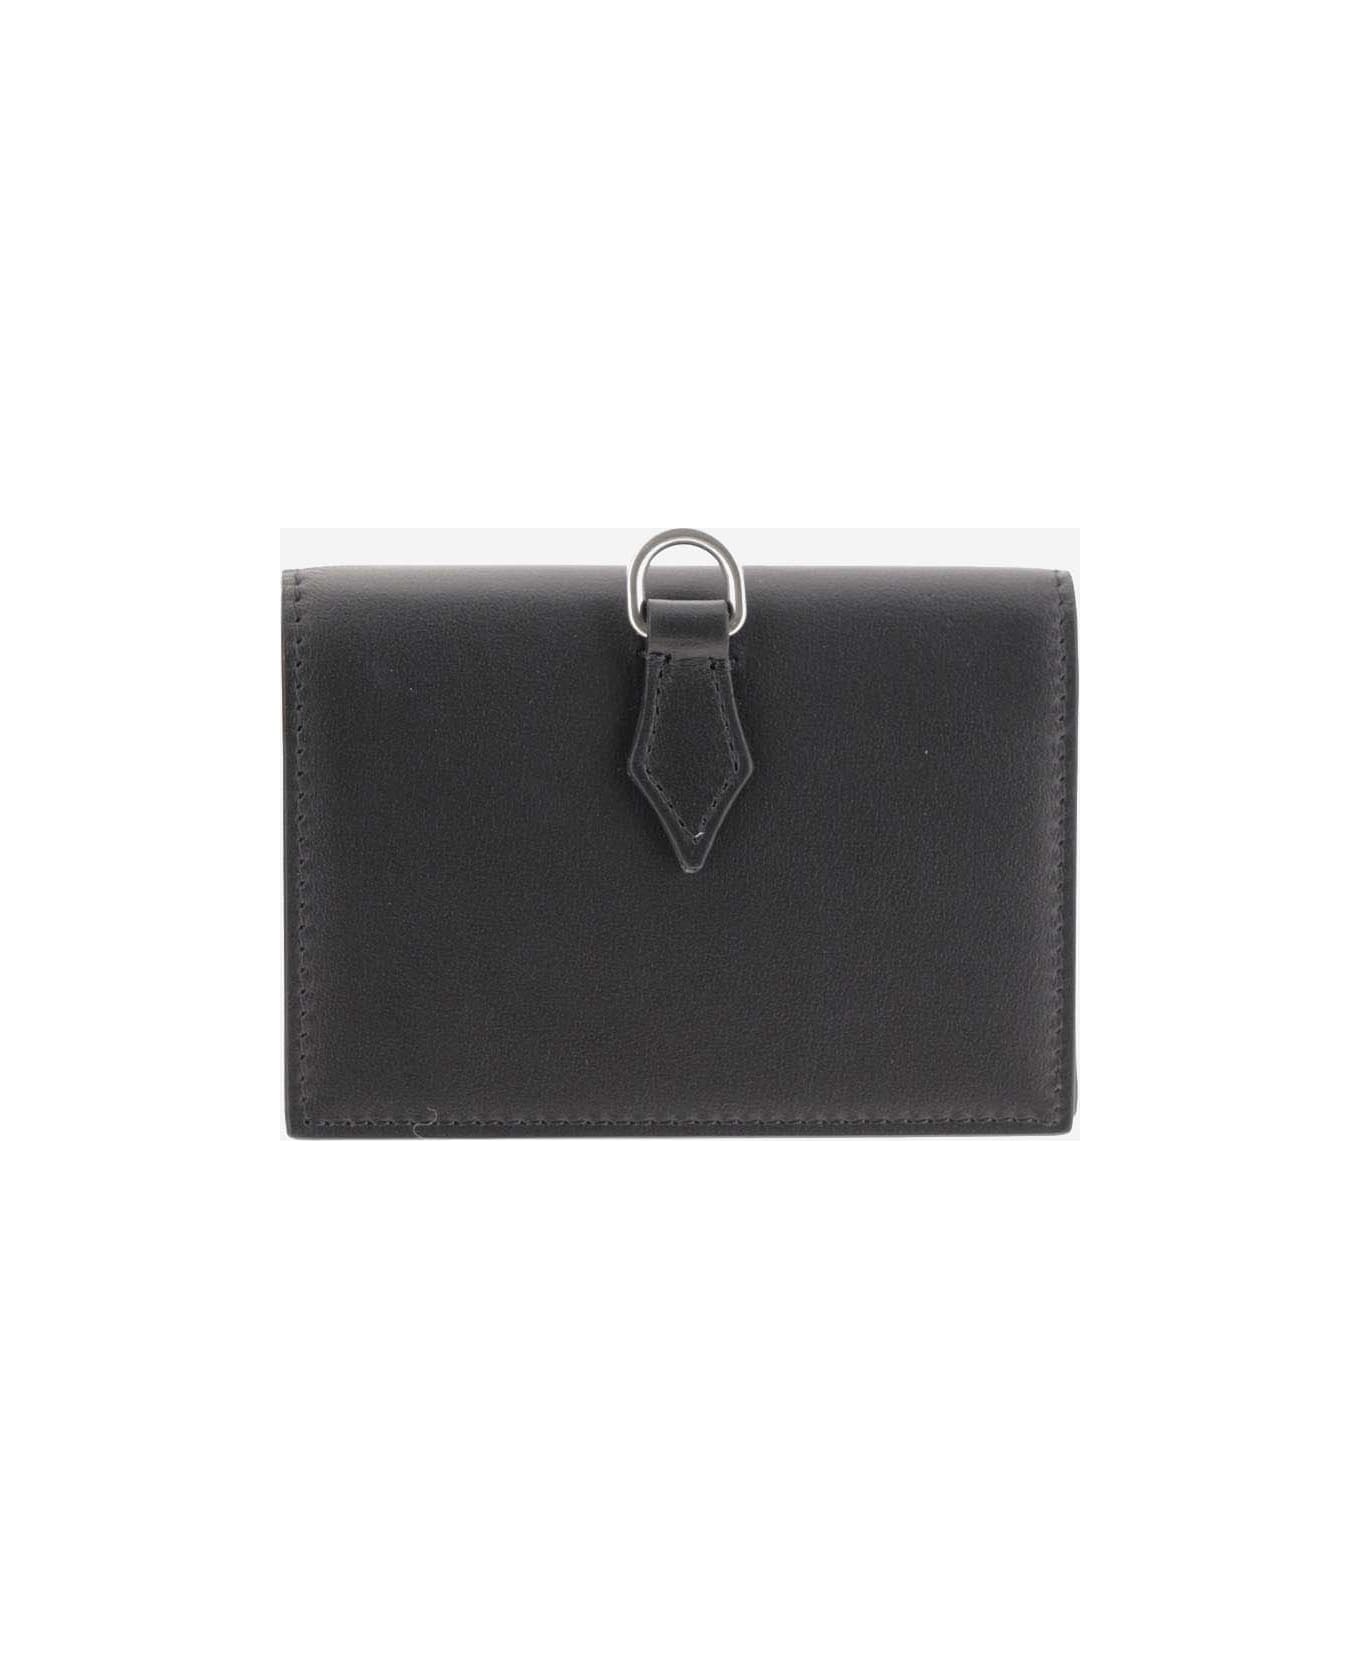 Montblanc Card Holder 4 Compartments Meisterstück Selection Soft - Black